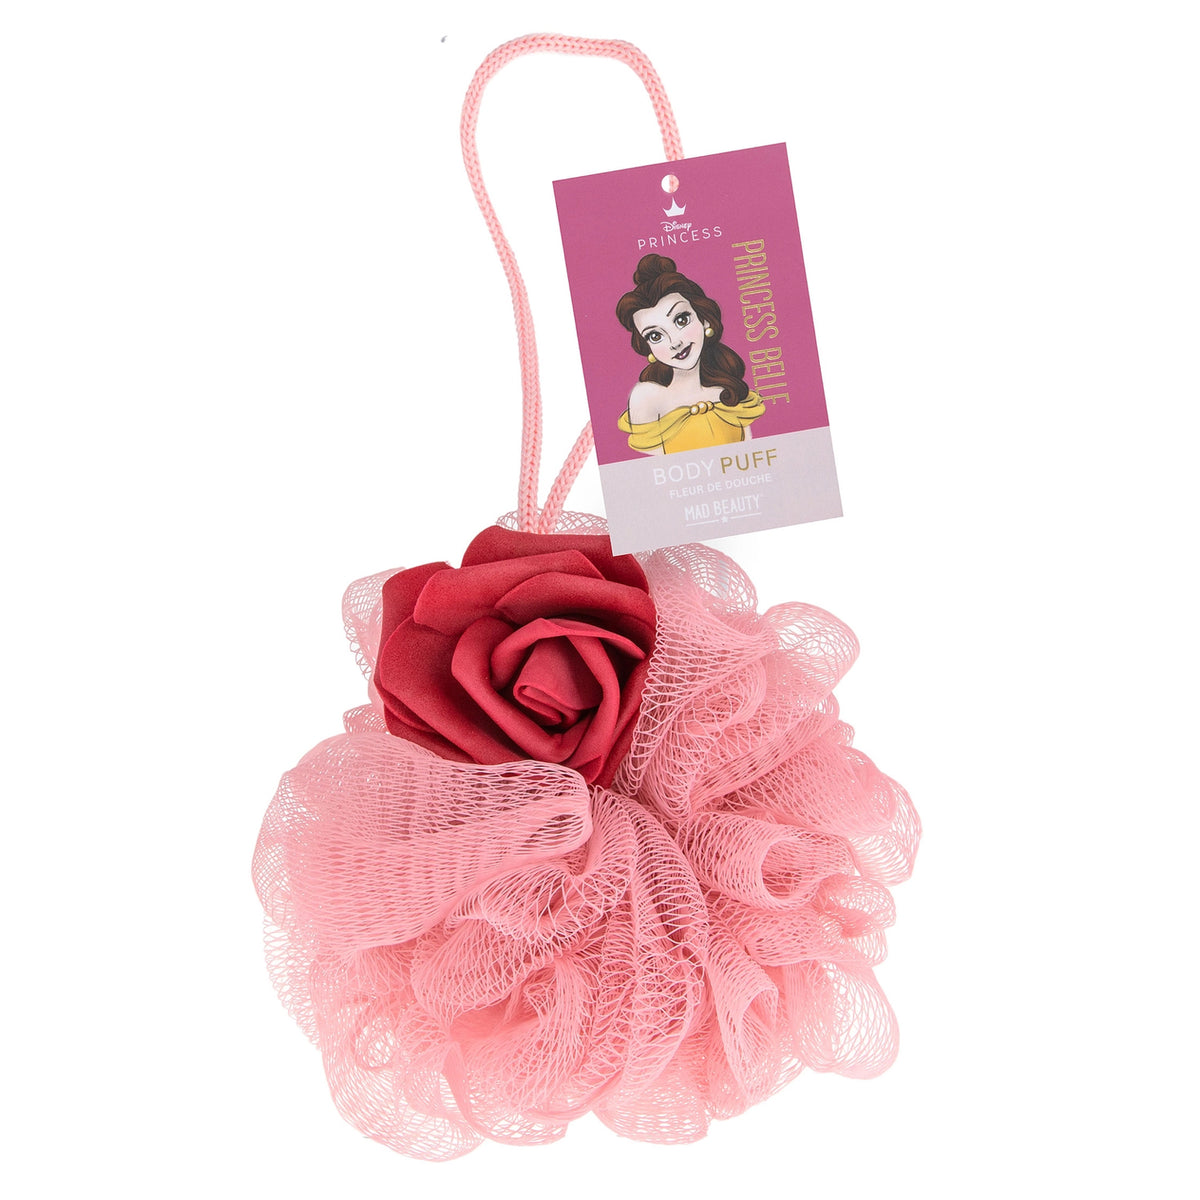 Disney Beauty and the Beast Pure Princess Belle Body Puff